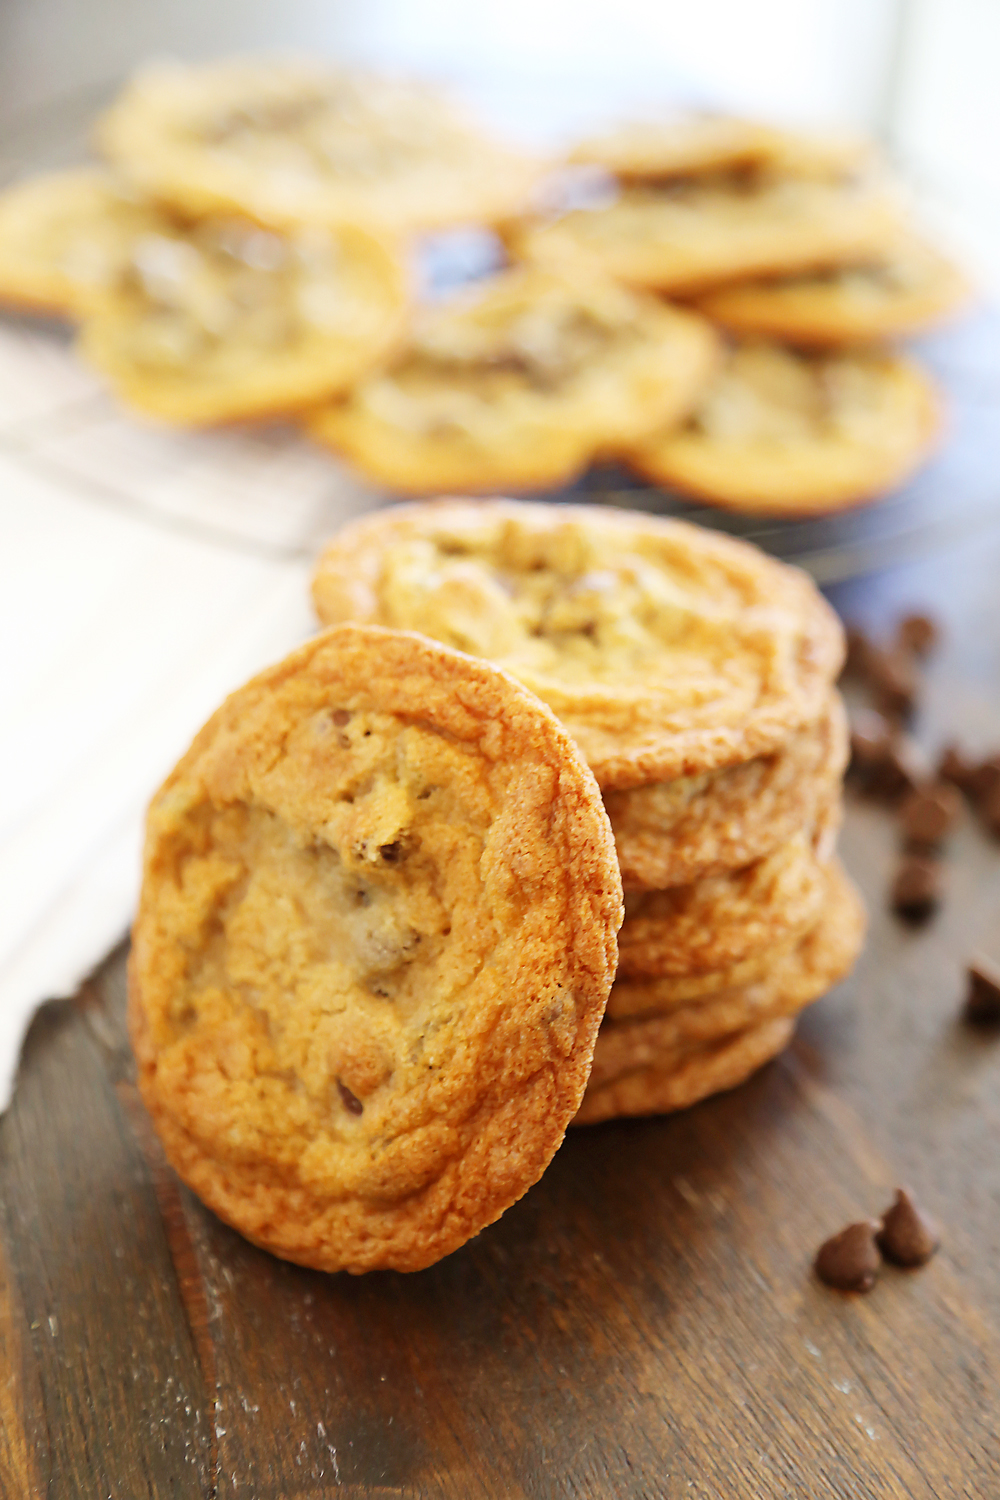 Thin and Chewy Chocolate Chip Cookies – Super buttery, chewy and irresistibly easy. Bake up a batch today! thecomfortofcooking.com